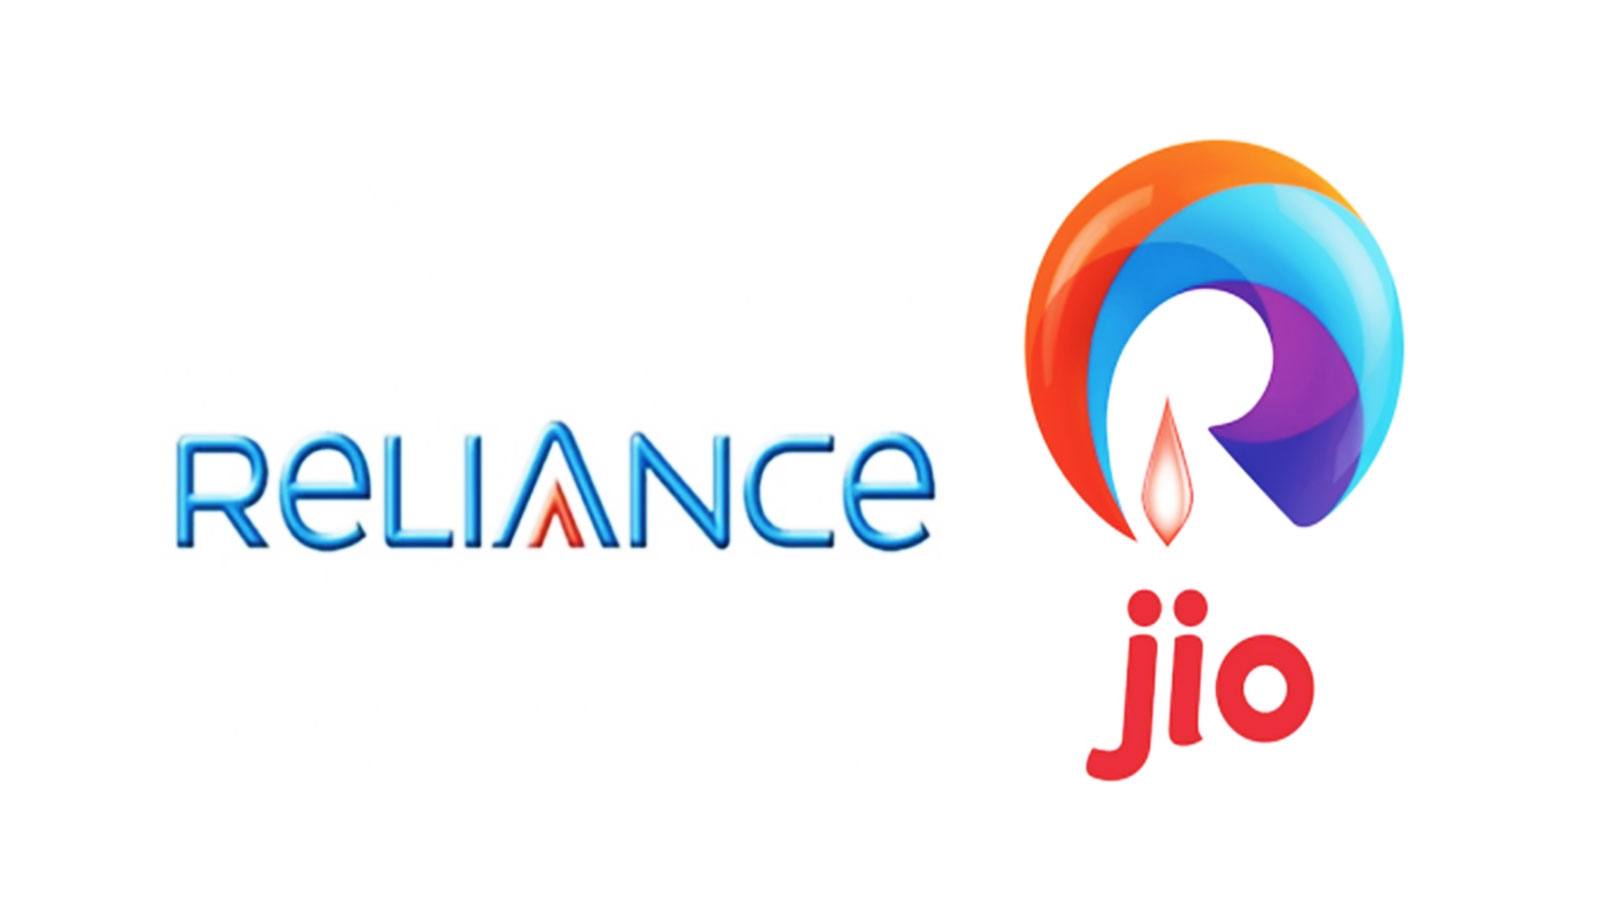 Reliance Jio 4G Preview Offer to be extended for 1 Year to Lyf Smartphone Users